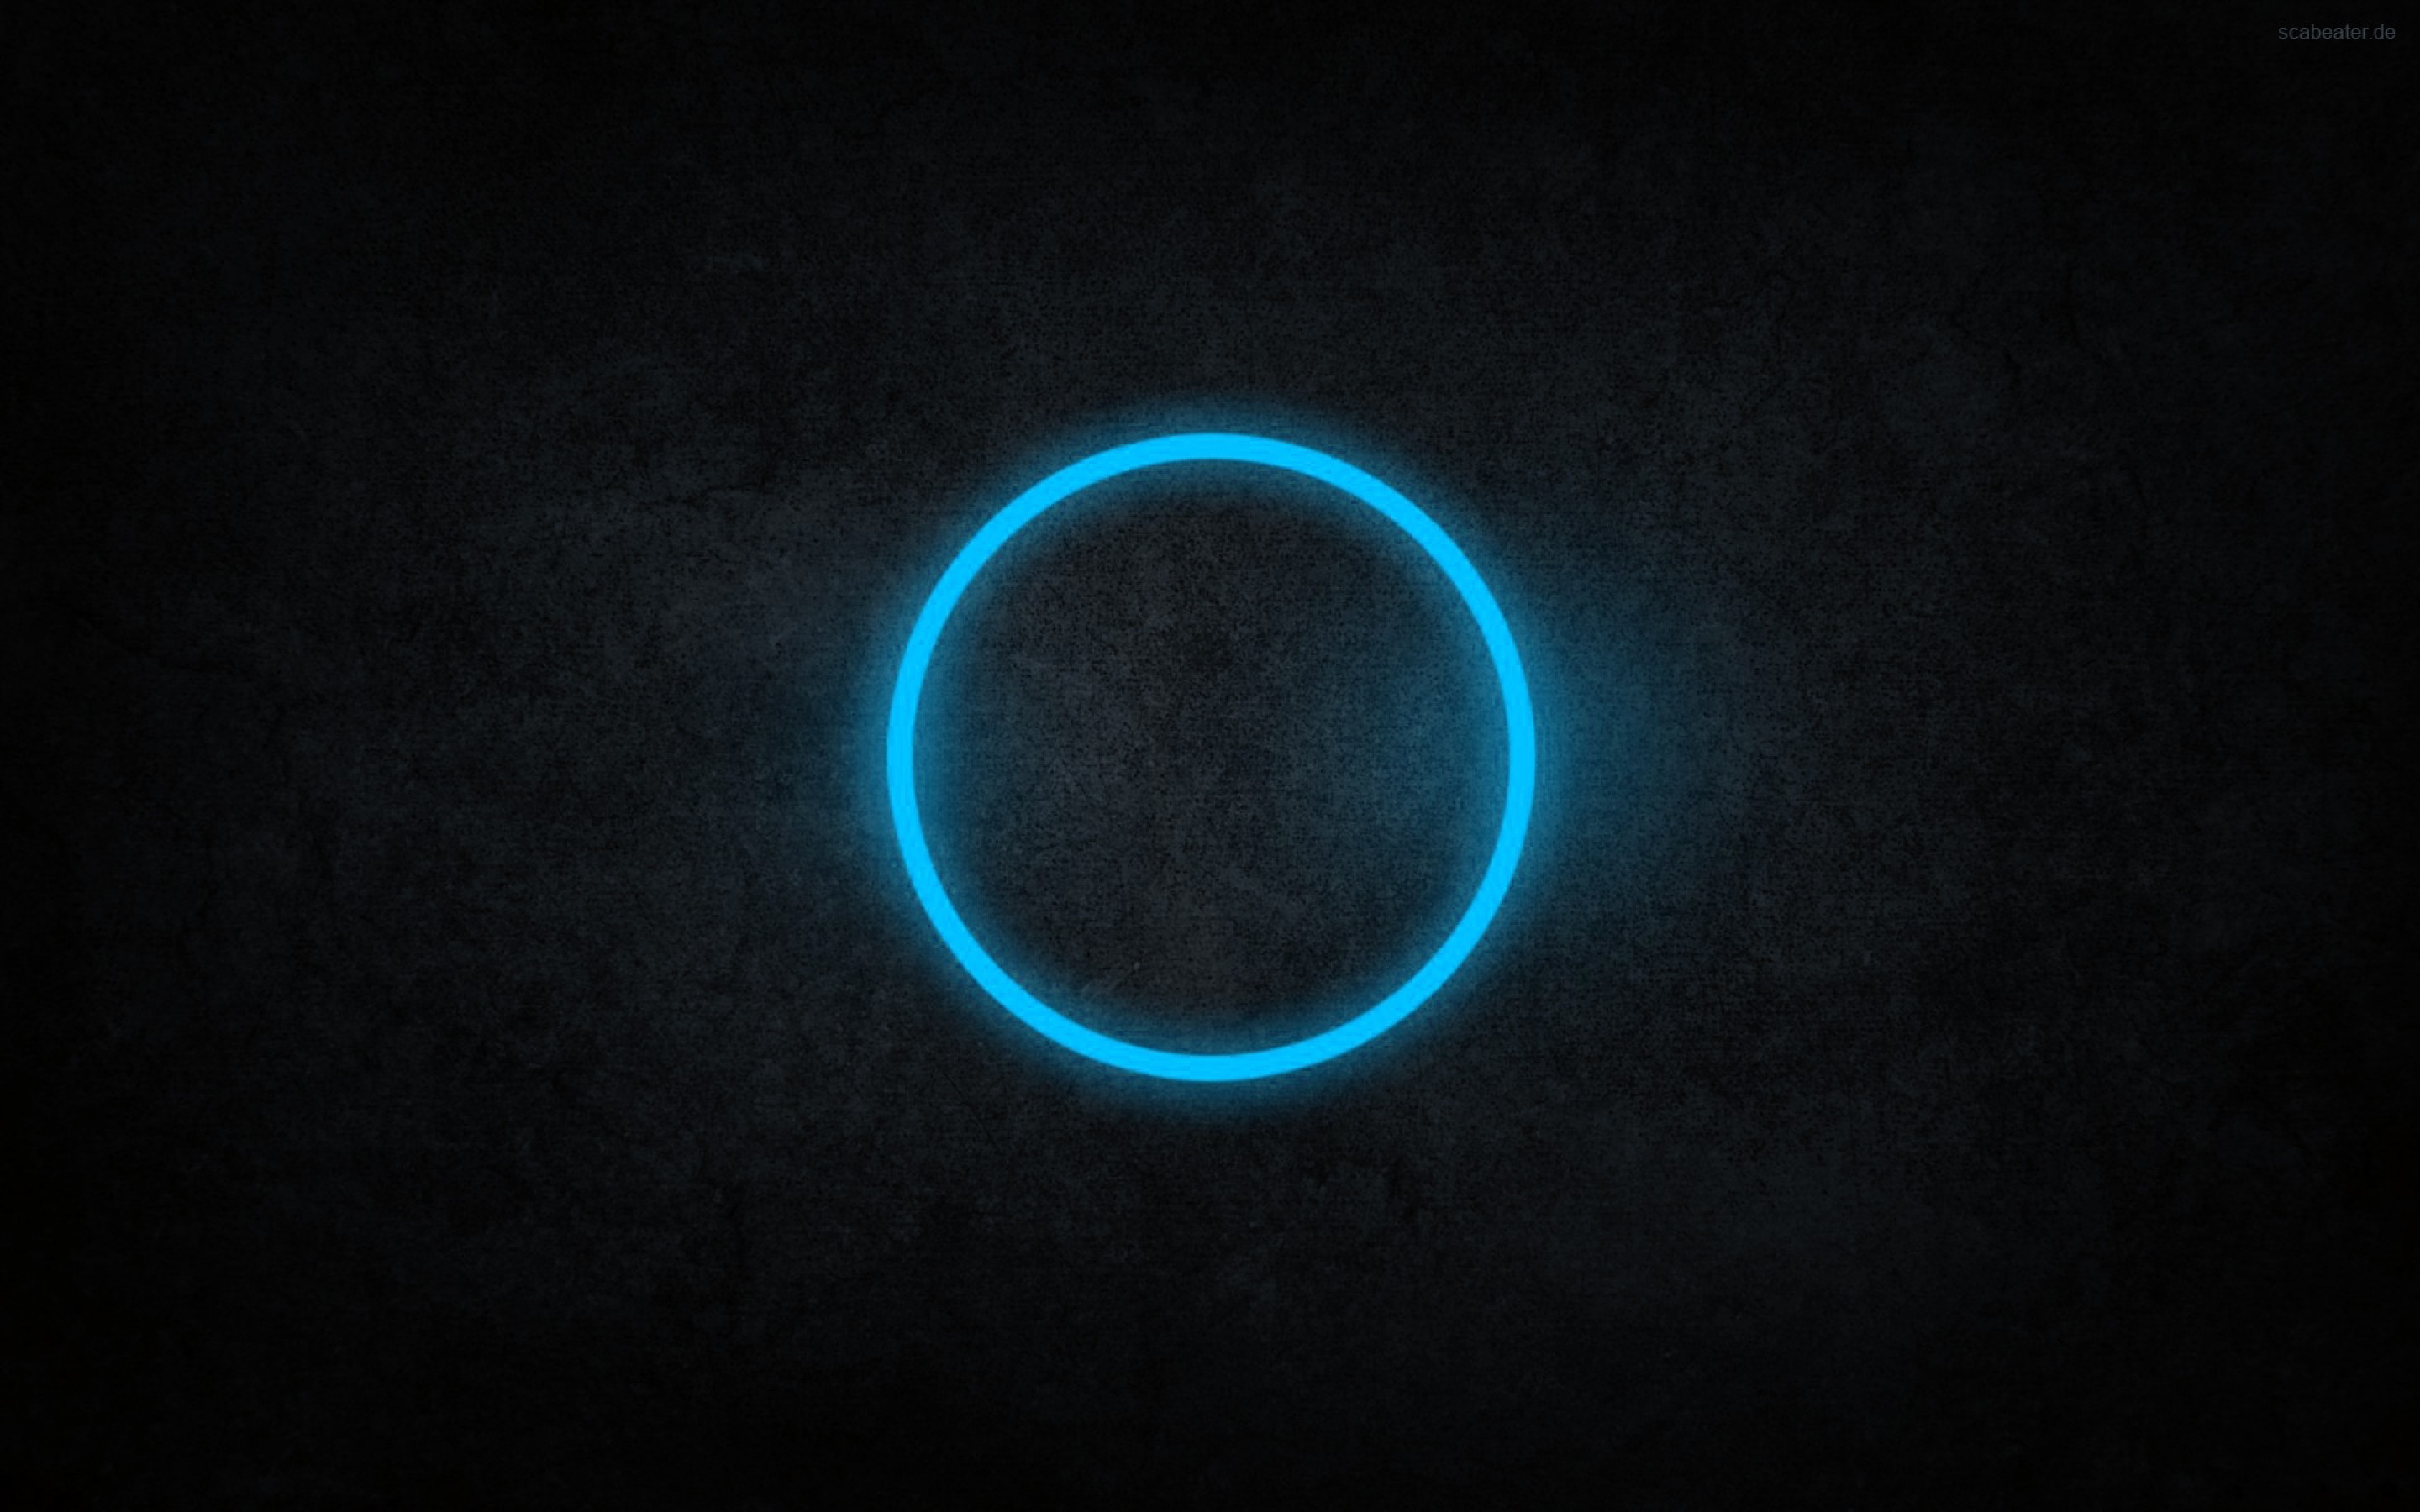 Wallpaper Black And Blue Circle Wallpapers And Images HD Wallpapers Download Free Images Wallpaper [wallpaper981.blogspot.com]